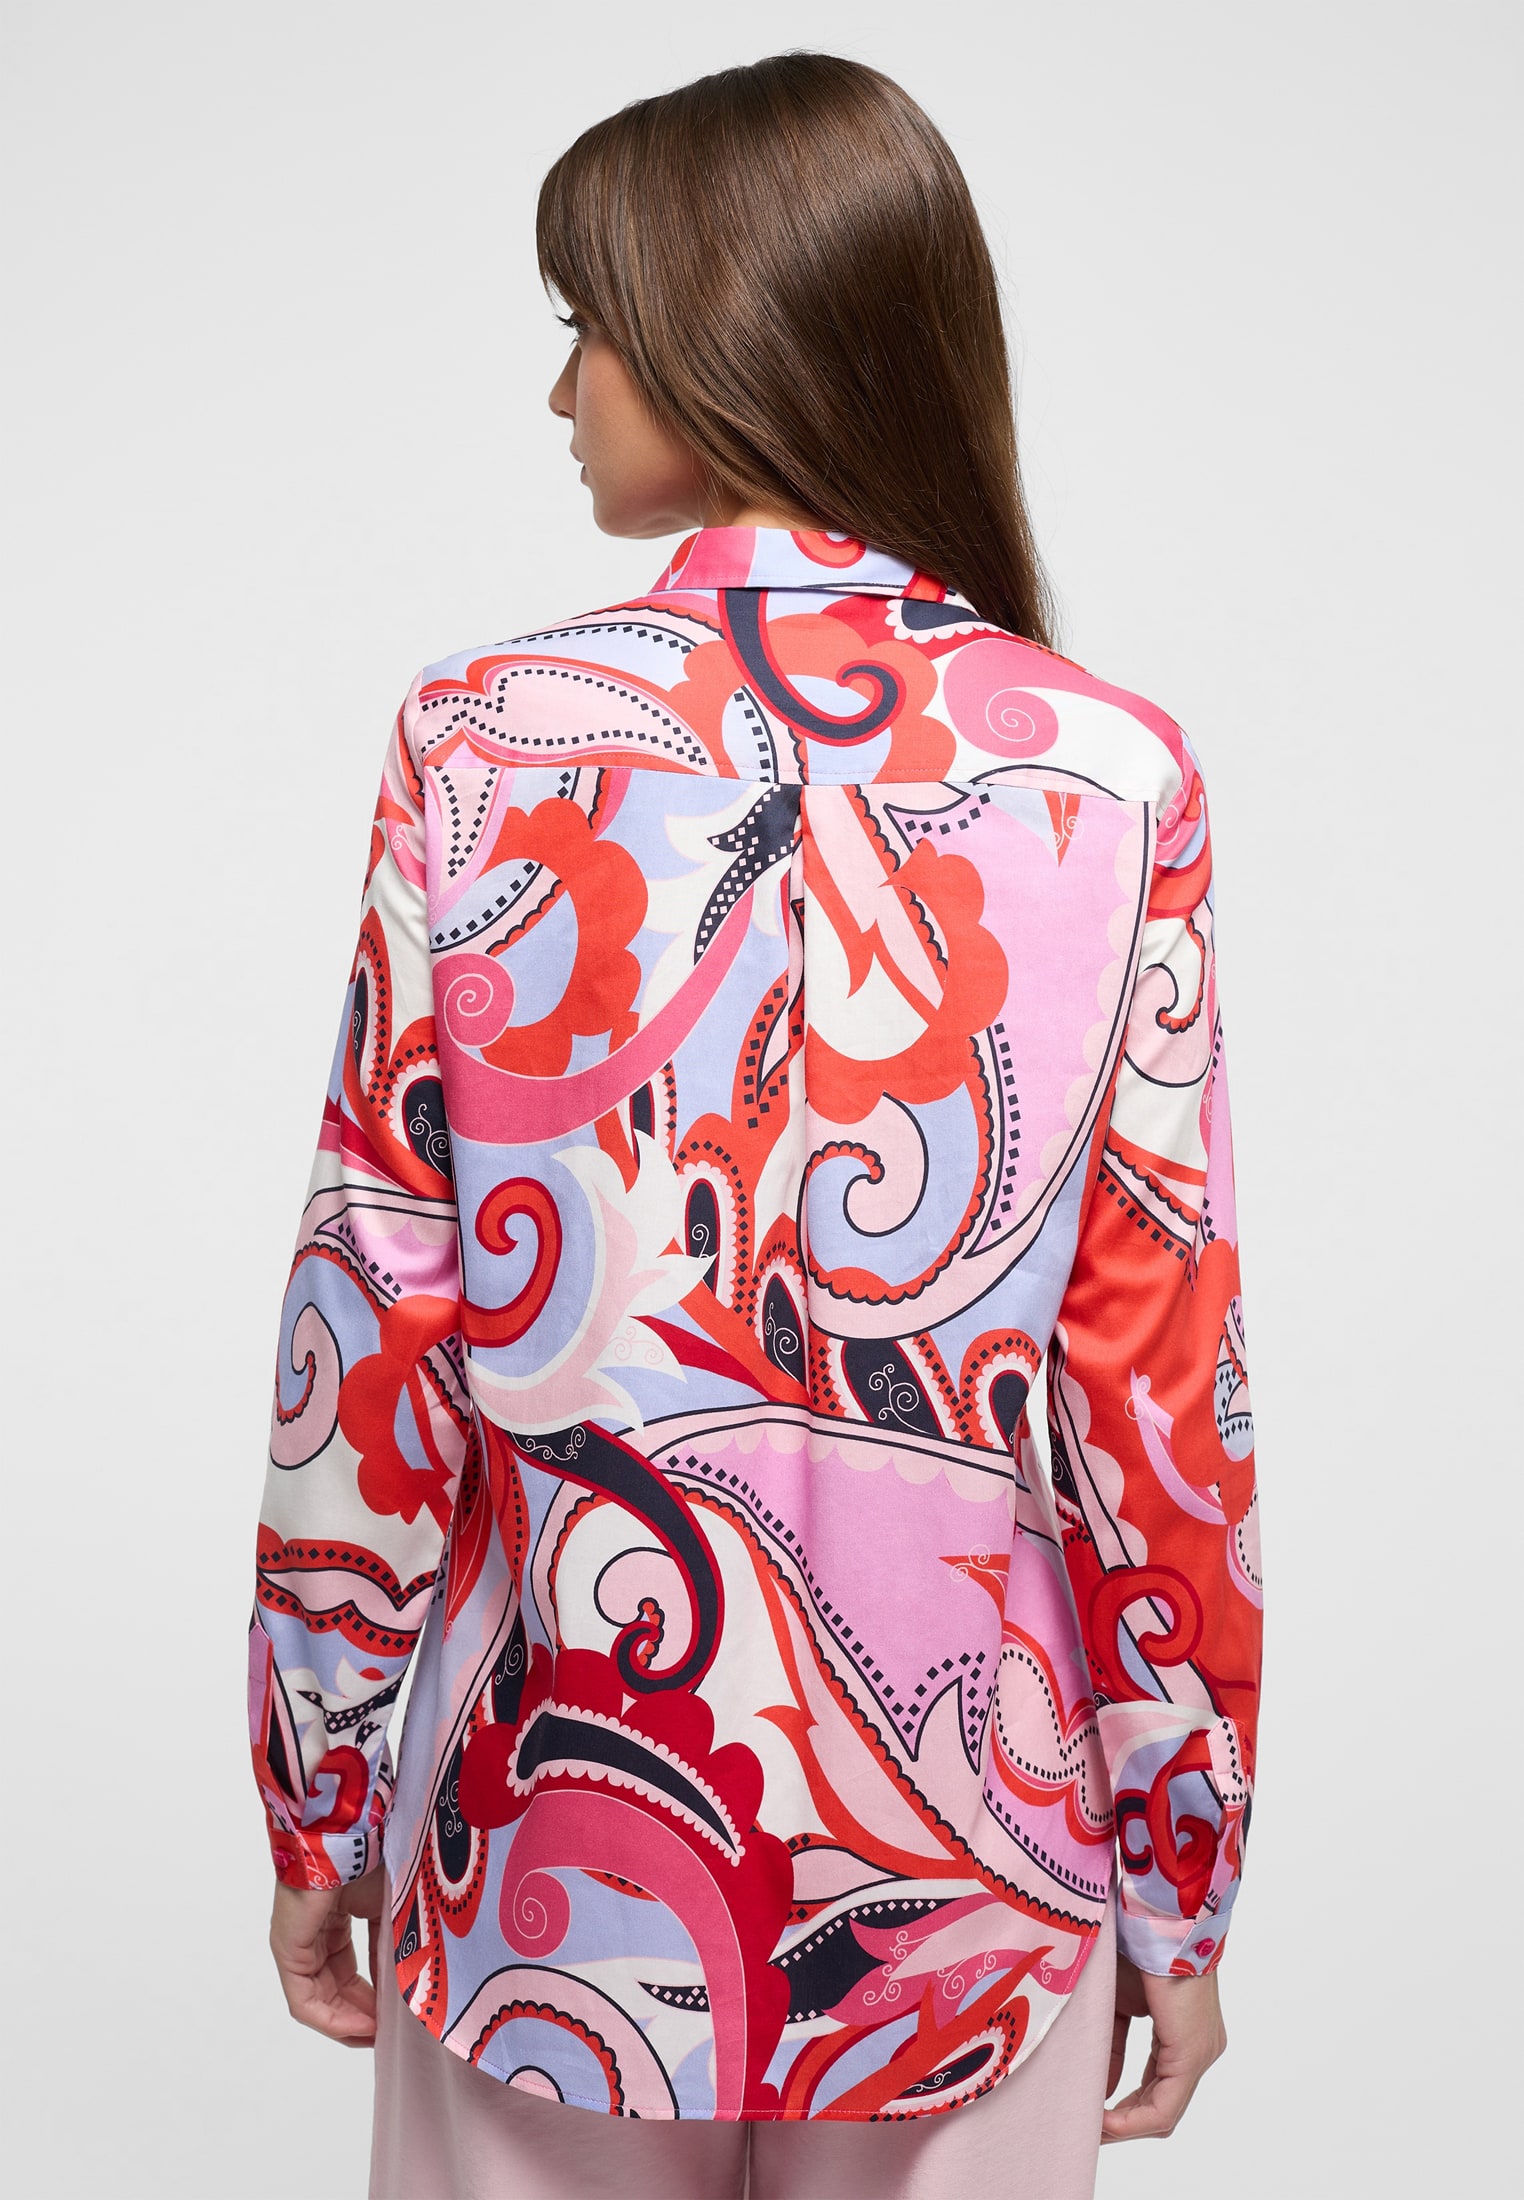 shirt-blouse in | | 2BL04275-15-21-46-1/1 | sleeve | printed pink 46 long pink